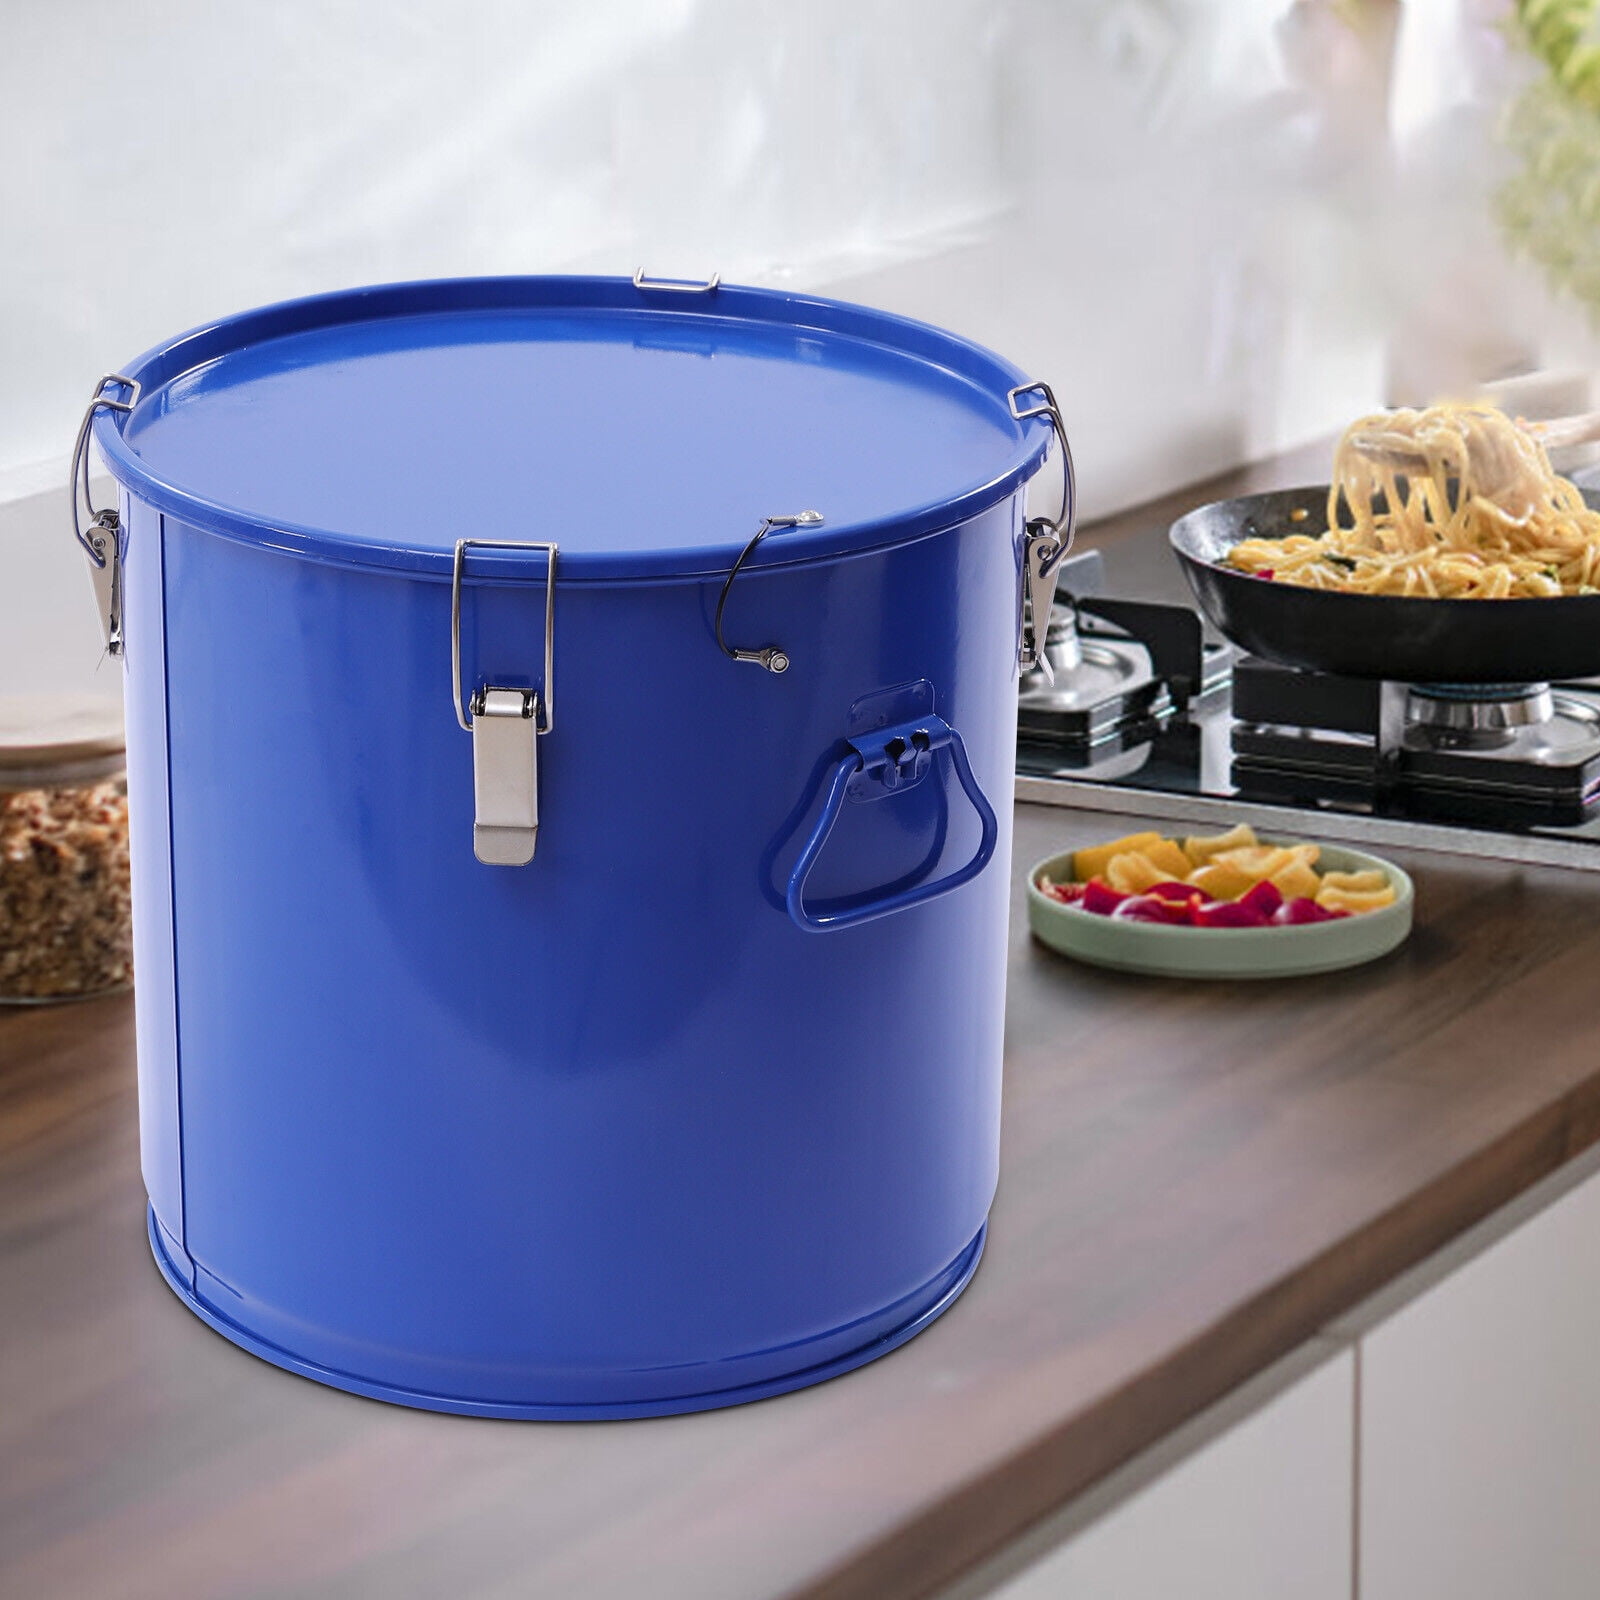 VEVOR Fryer Grease Bucket 6 gal. Rust-proof Coating Oil Transport Container with Lid and Lock Clips for Hot Cooking, Blue